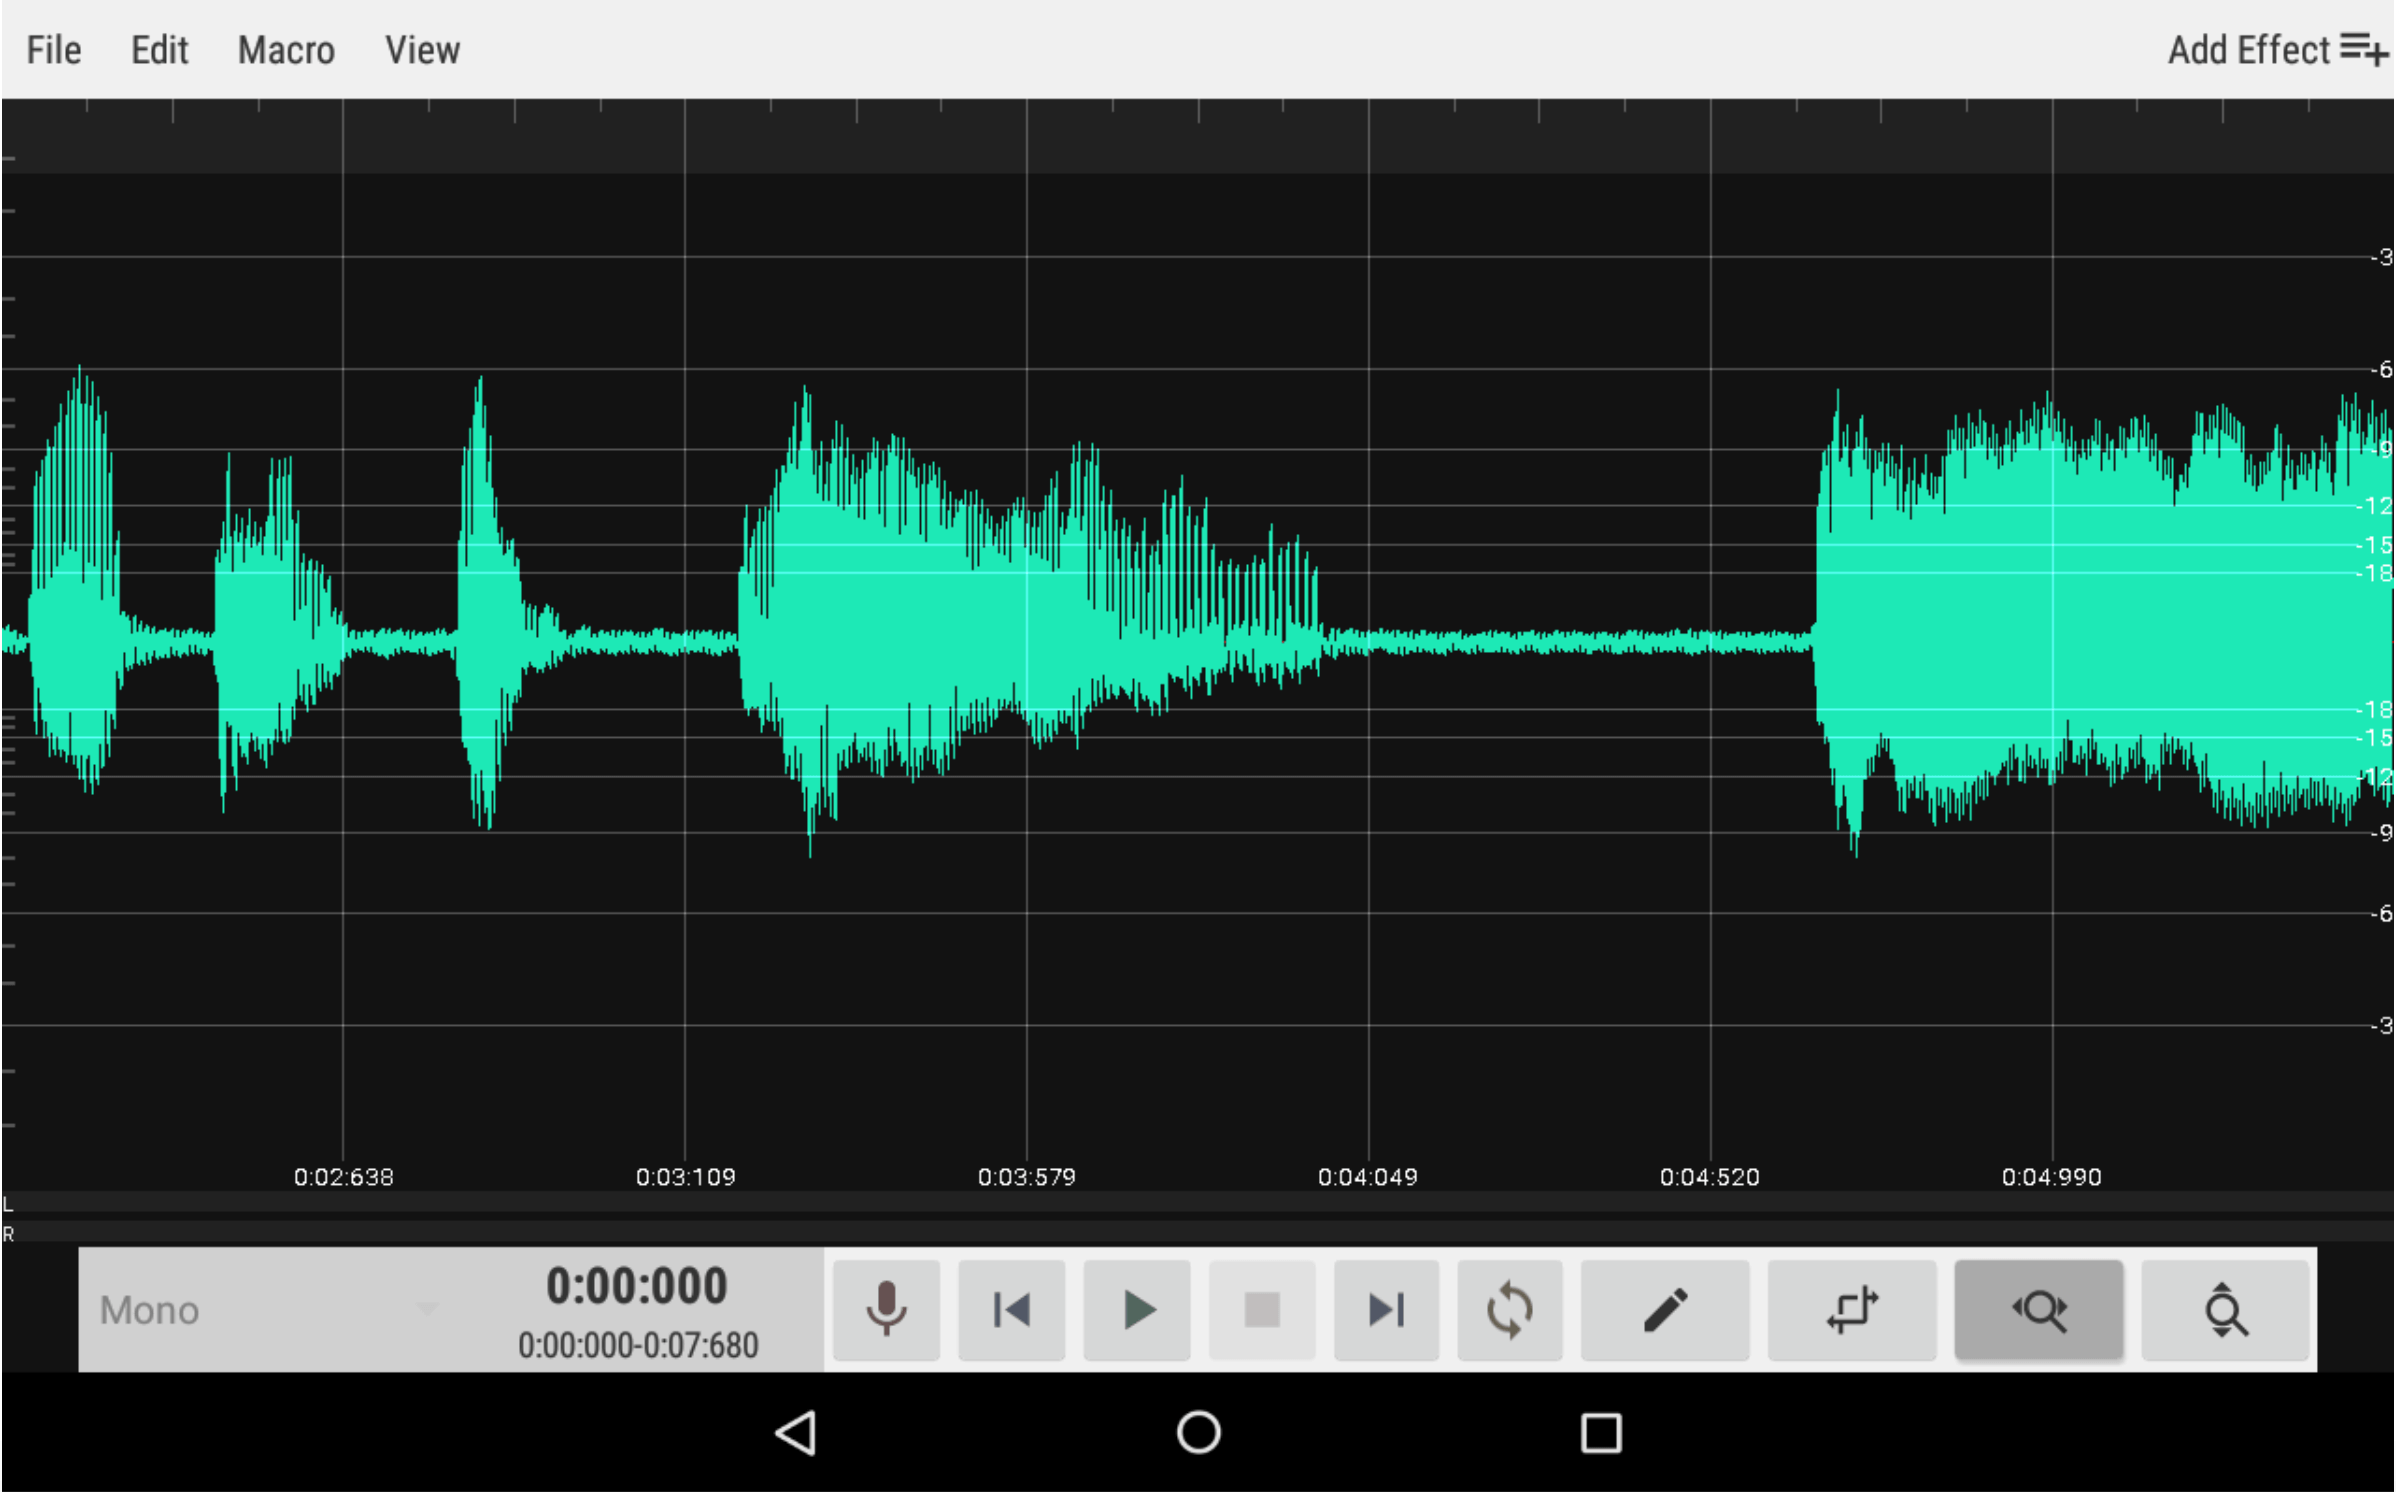 audio editor for Android - WaveEditor